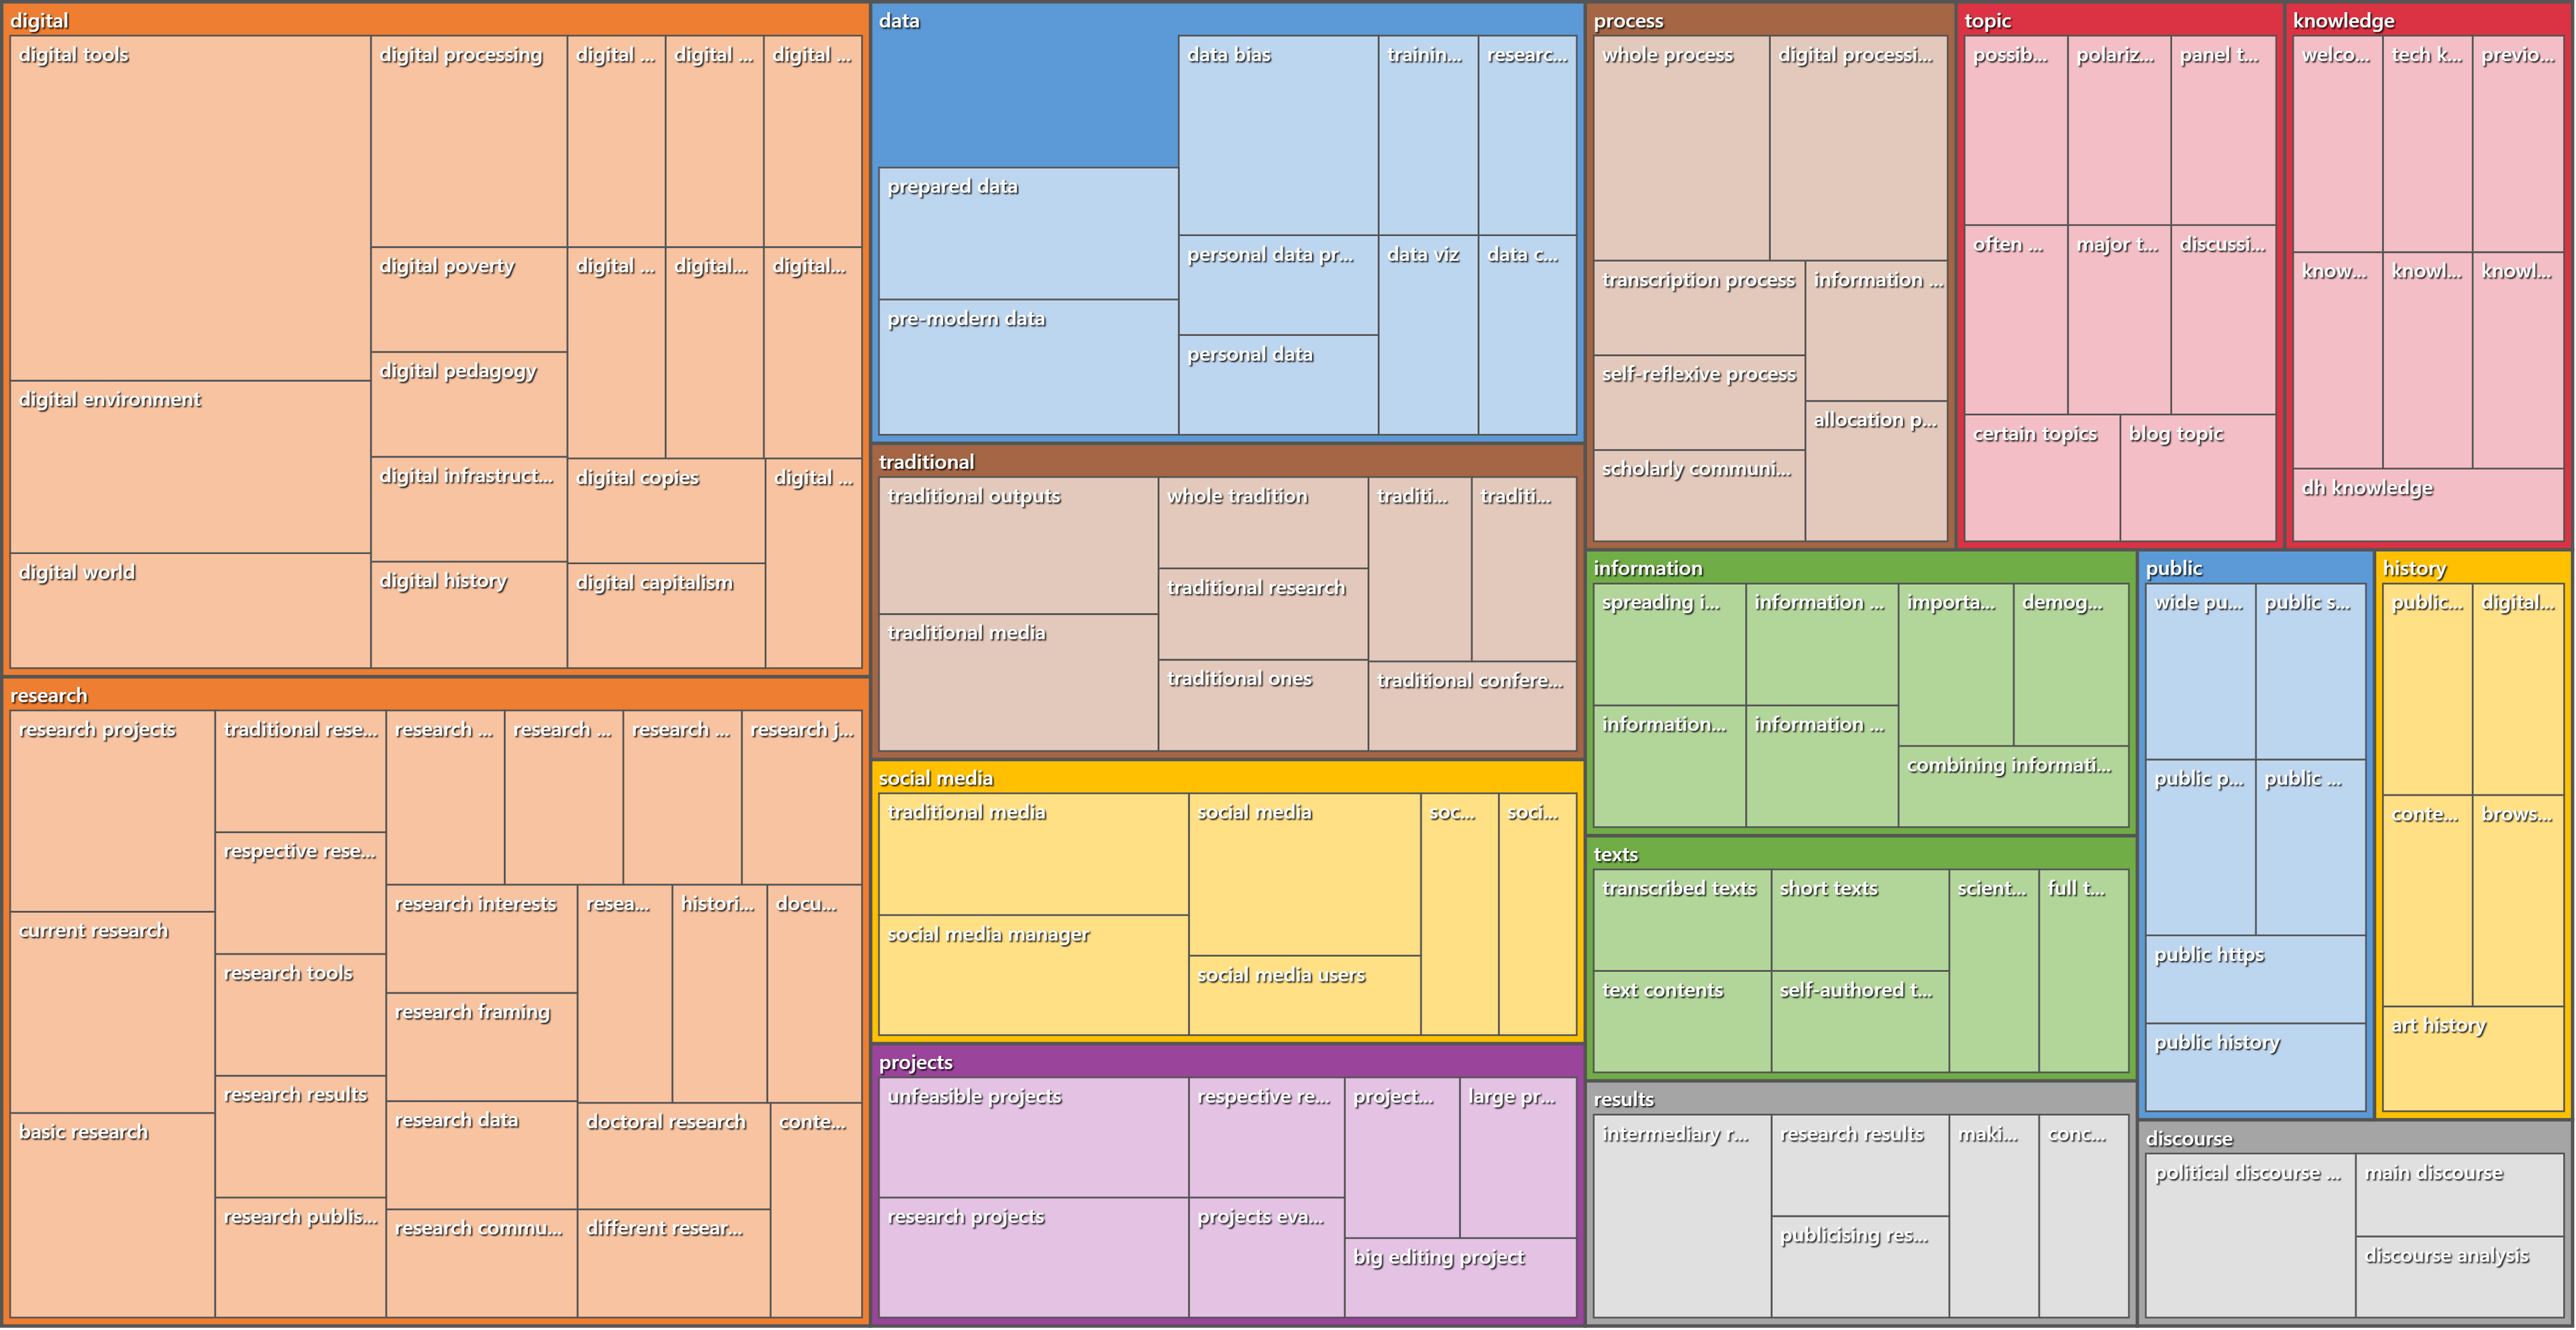 Hierarchical Theme Visualization